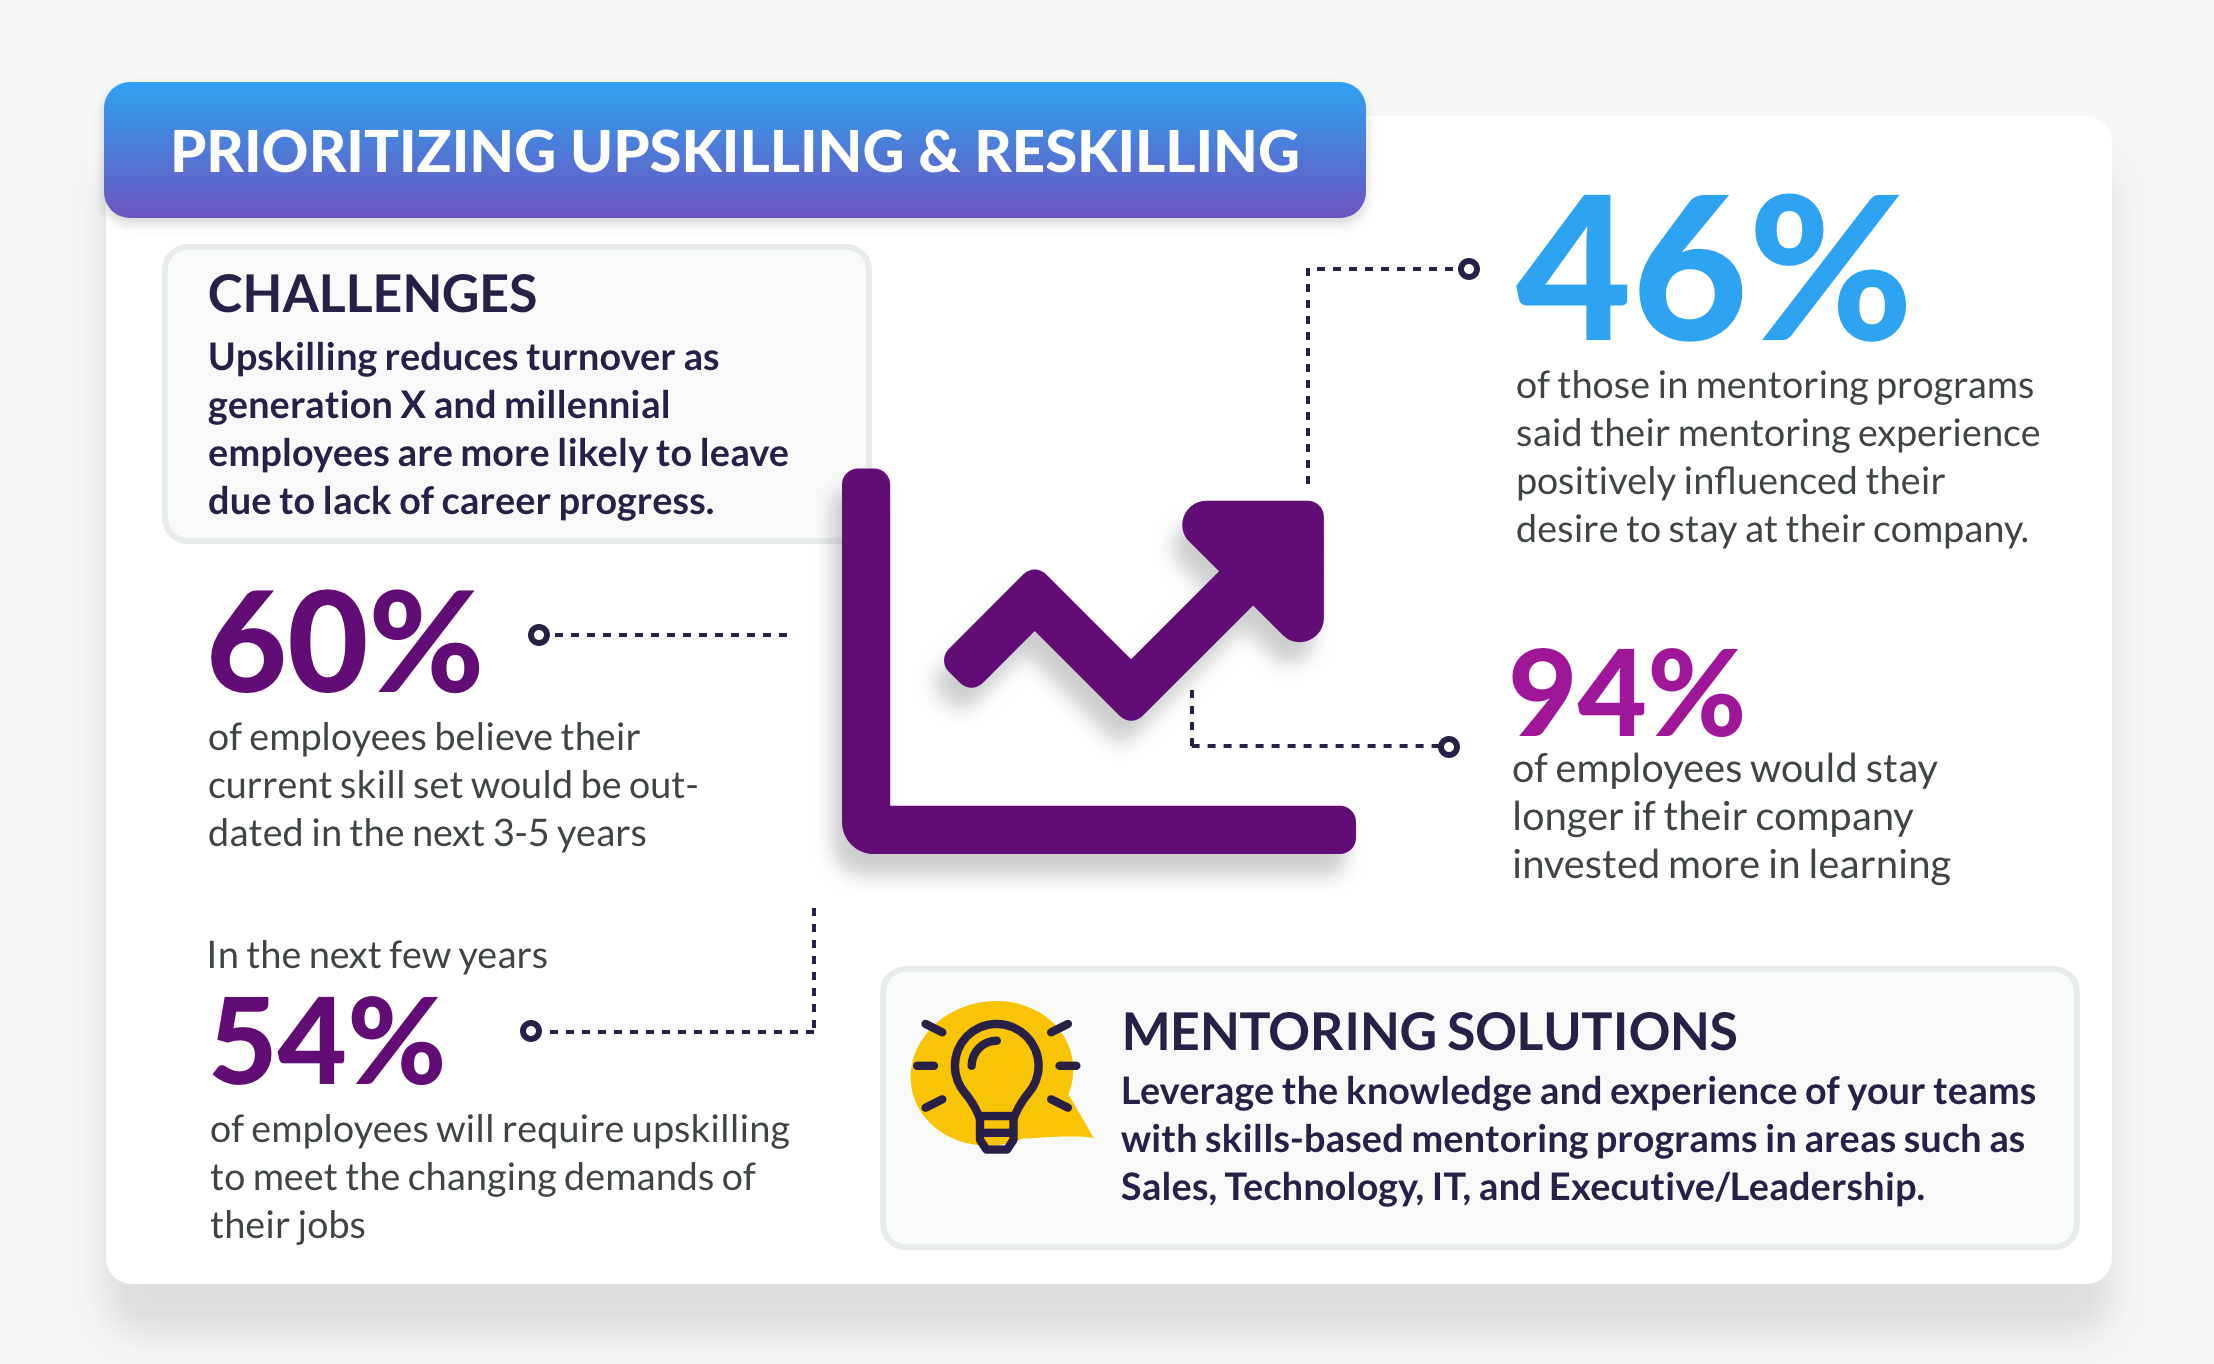 Upskilling and reskilling data points for 2022 mentoring trends.